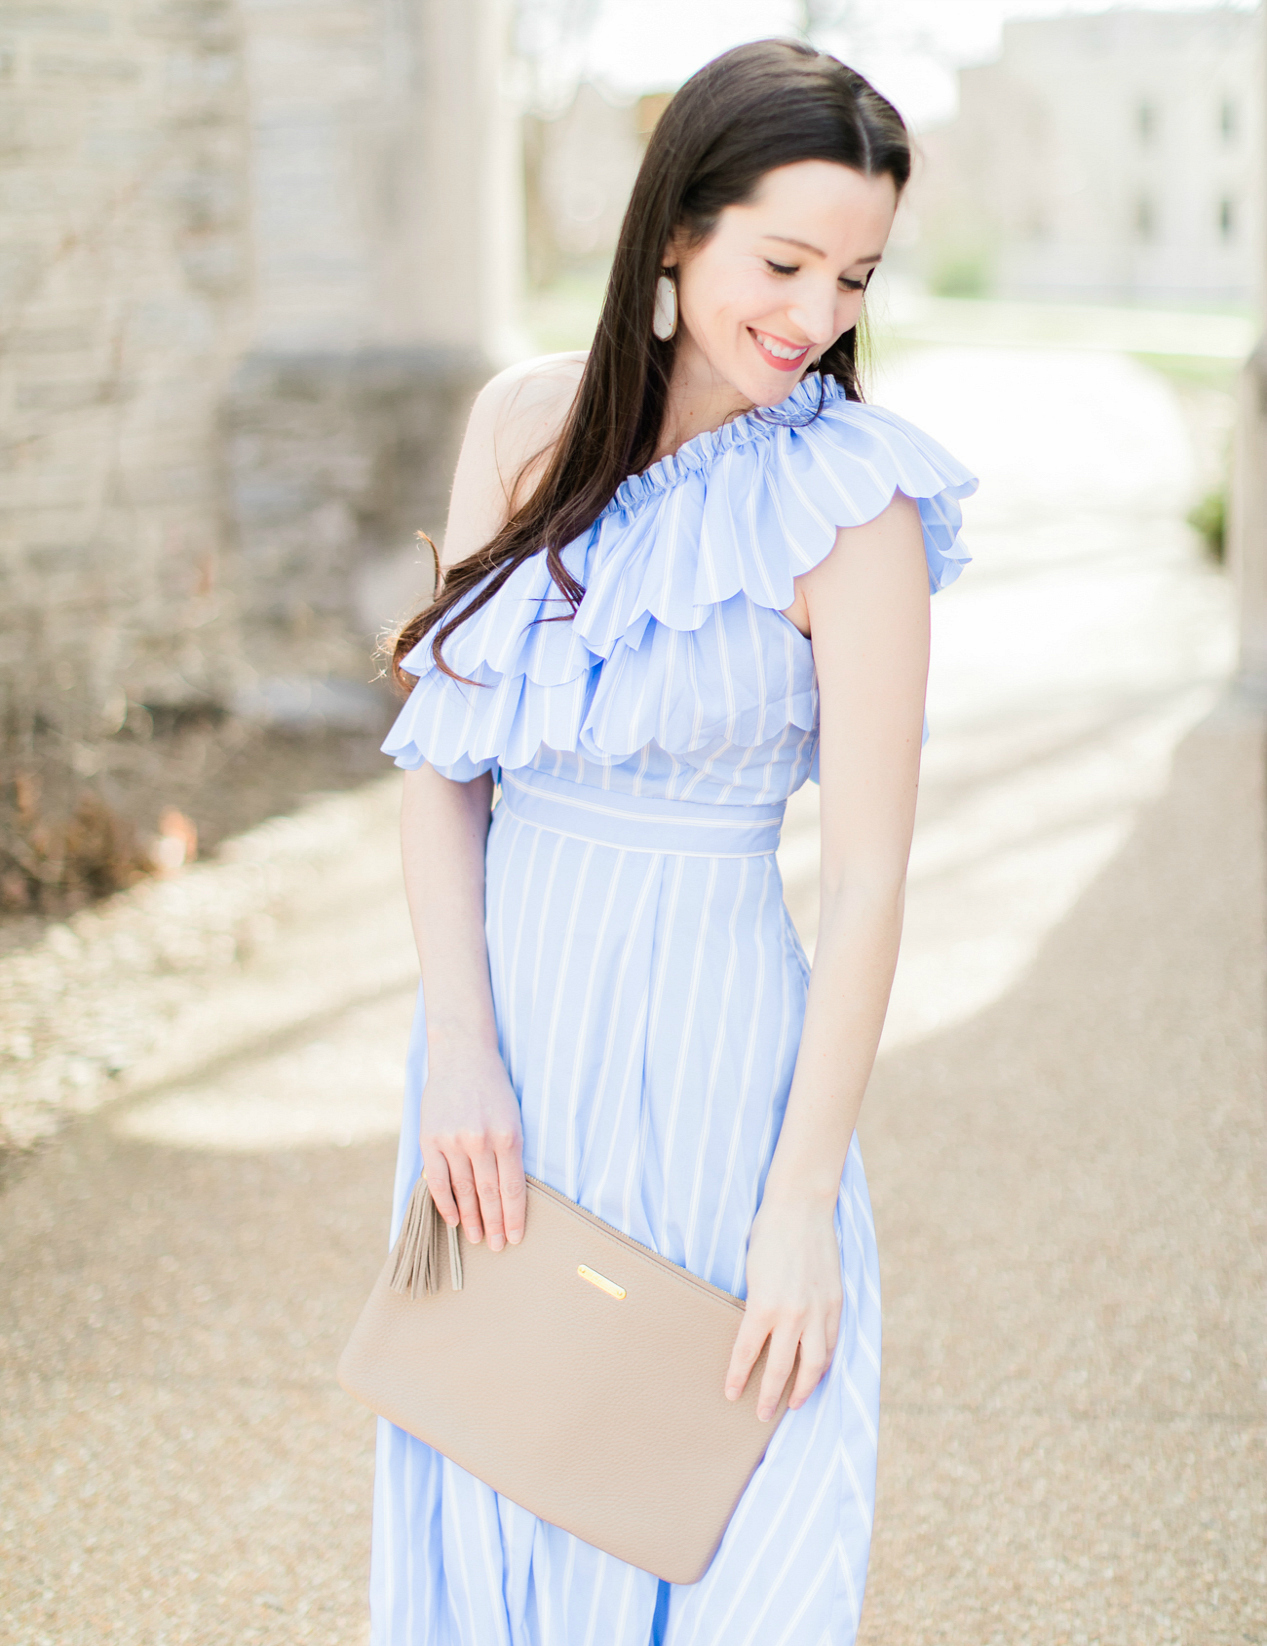 Best Dresses to Wear to a Spring Wedding by southern fashion blogger Stephanie Ziajka from Diary of a Debutante, spring wedding guest outfits, wedding guest dress ideas, dresses to wear to a spring wedding, blue striped double ruffle midi dress